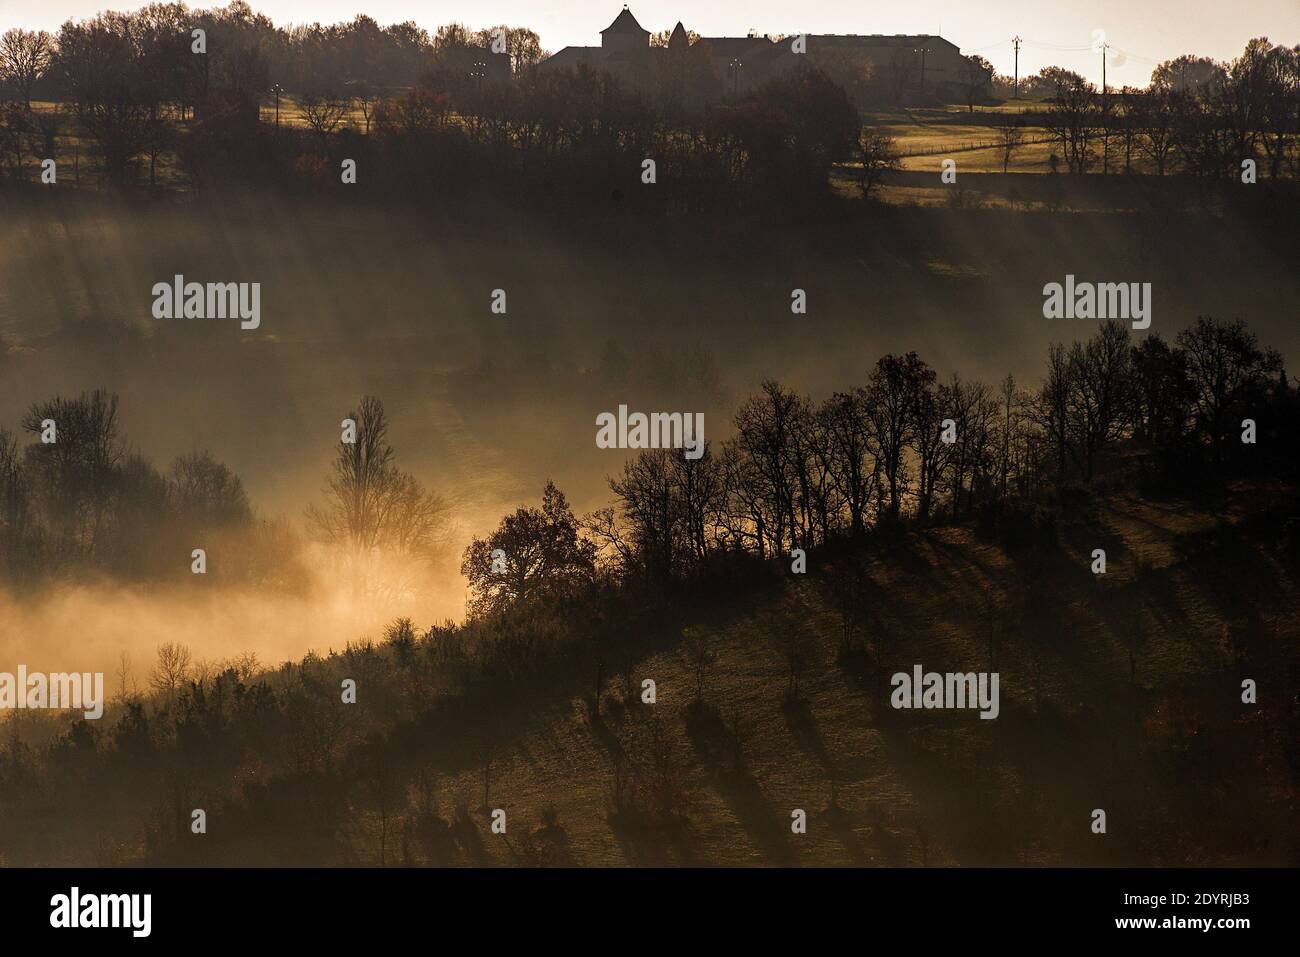 Early morning ground mist in a southern French landscape. Stock Photo